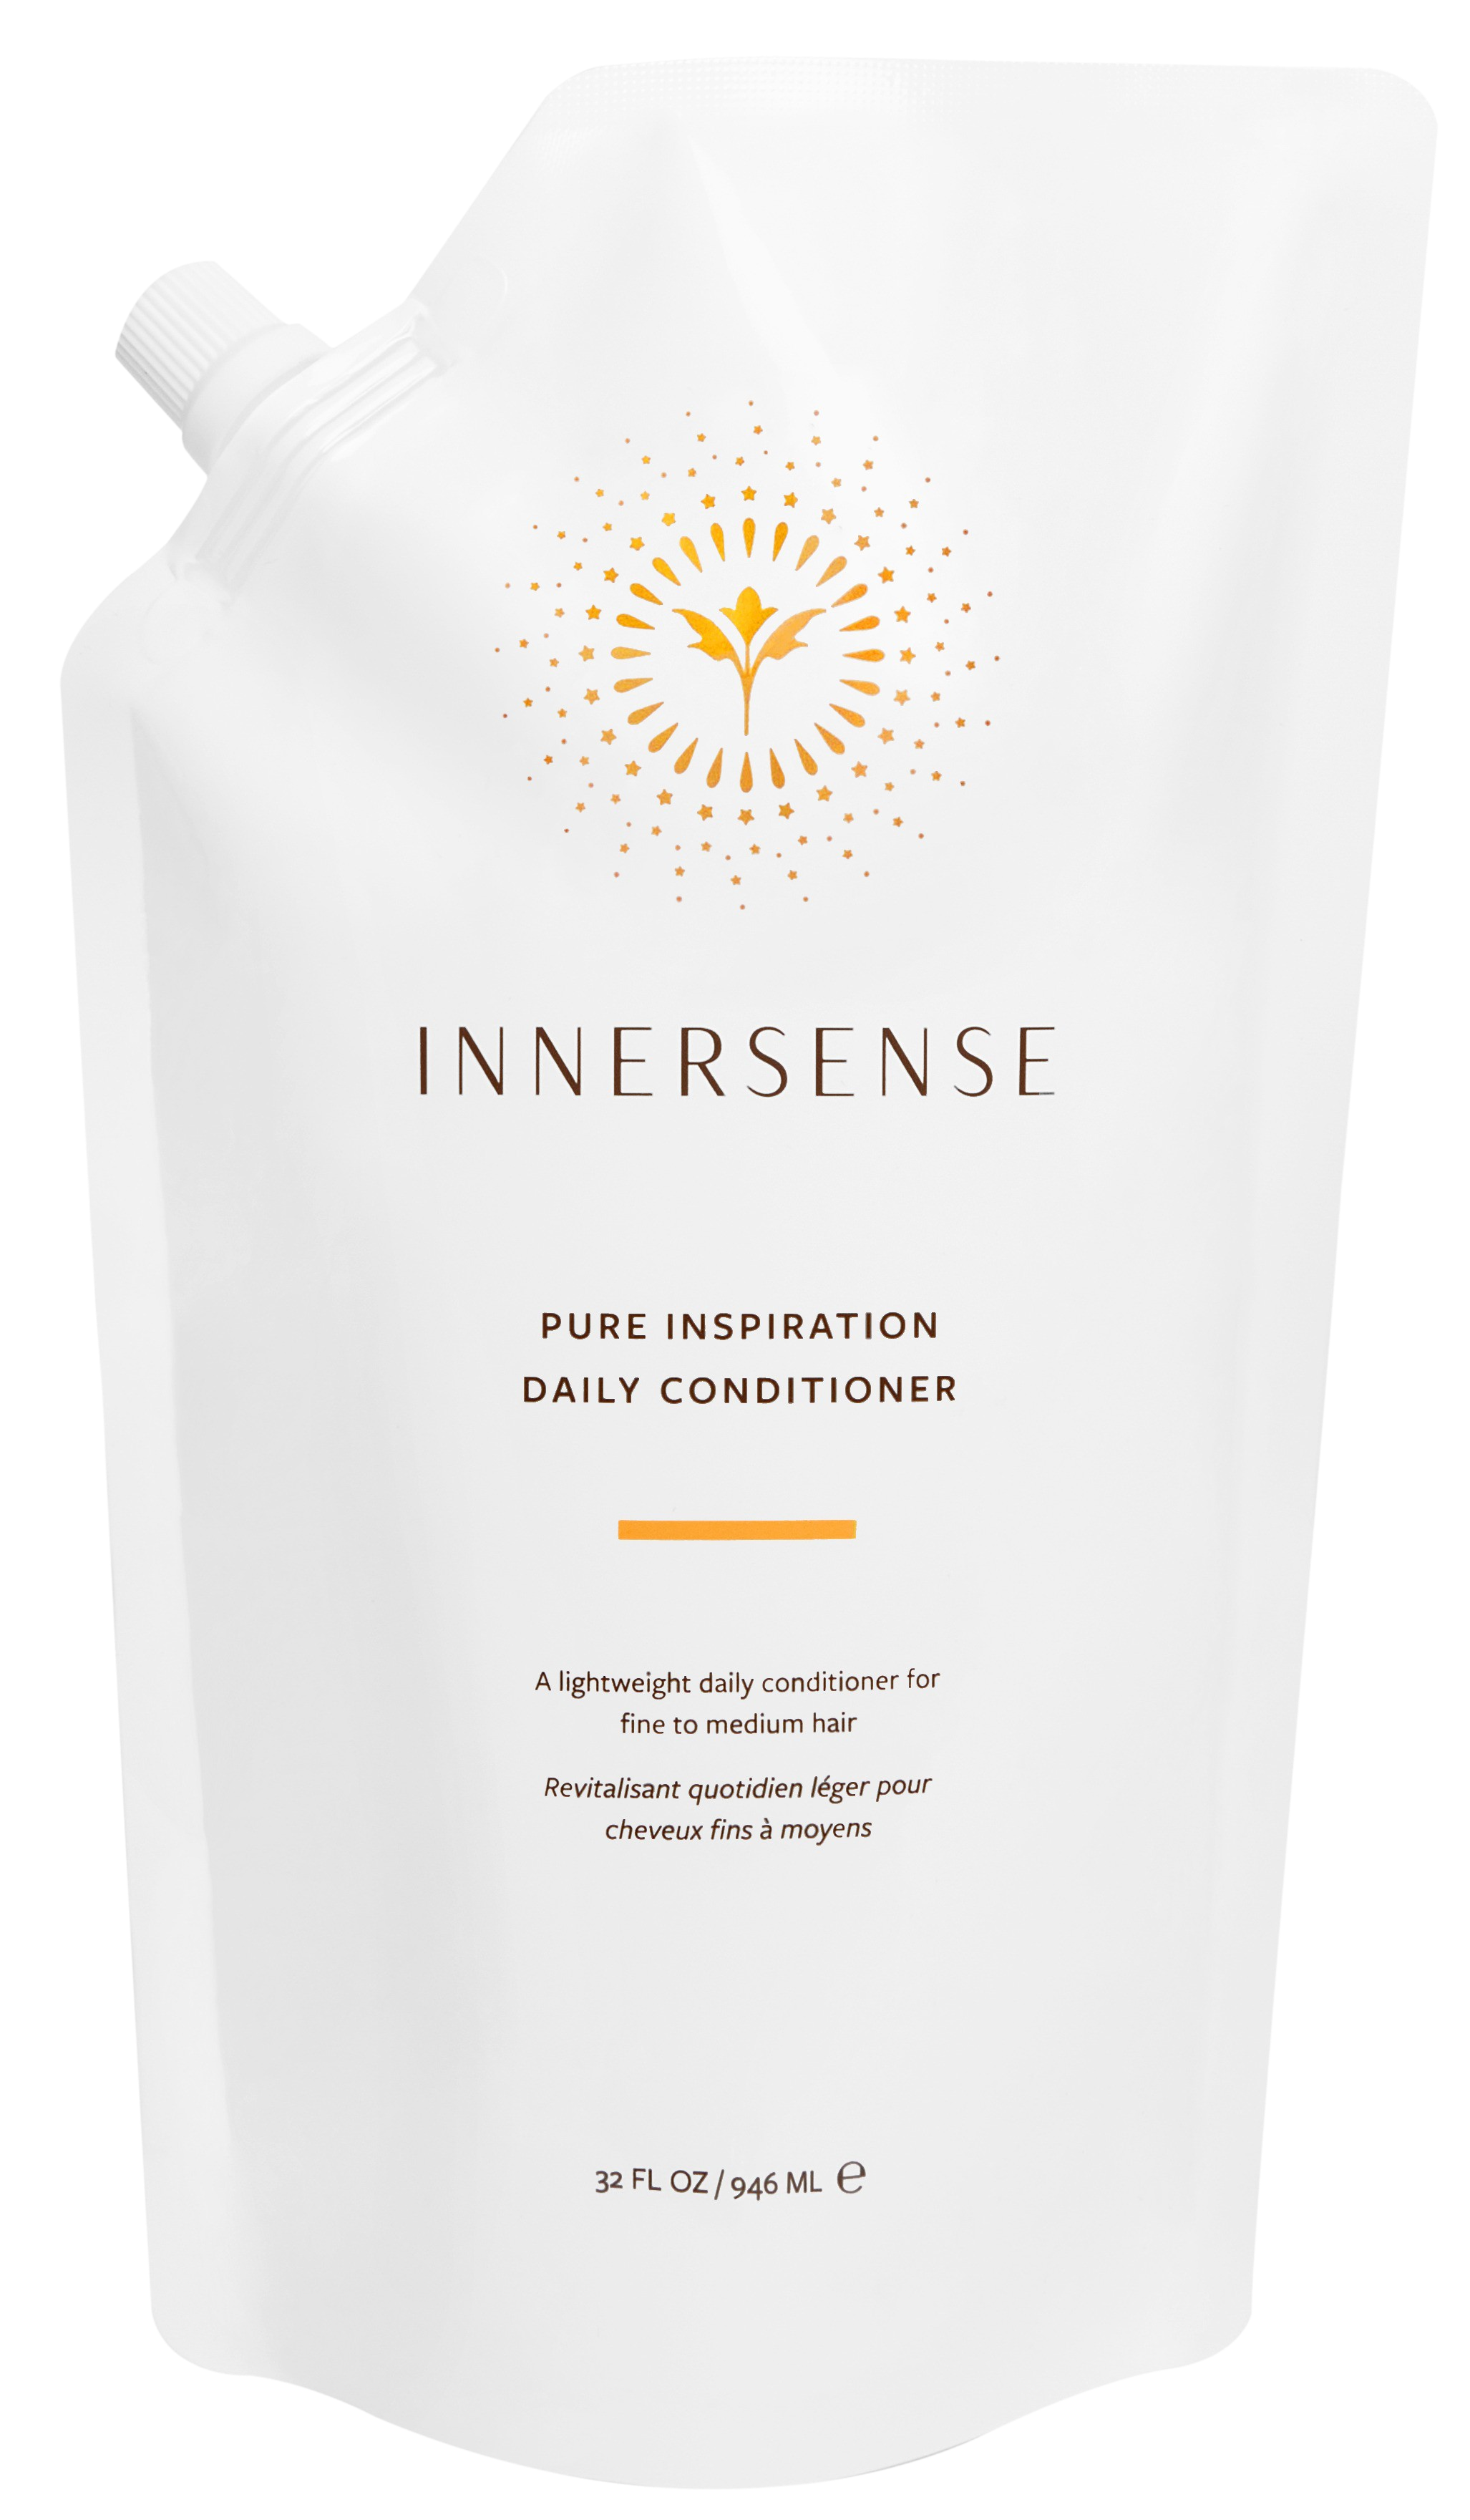 Billede af Innersense Pure Inspiration Daily Conditioner Refill (946 ml) hos Well.dk